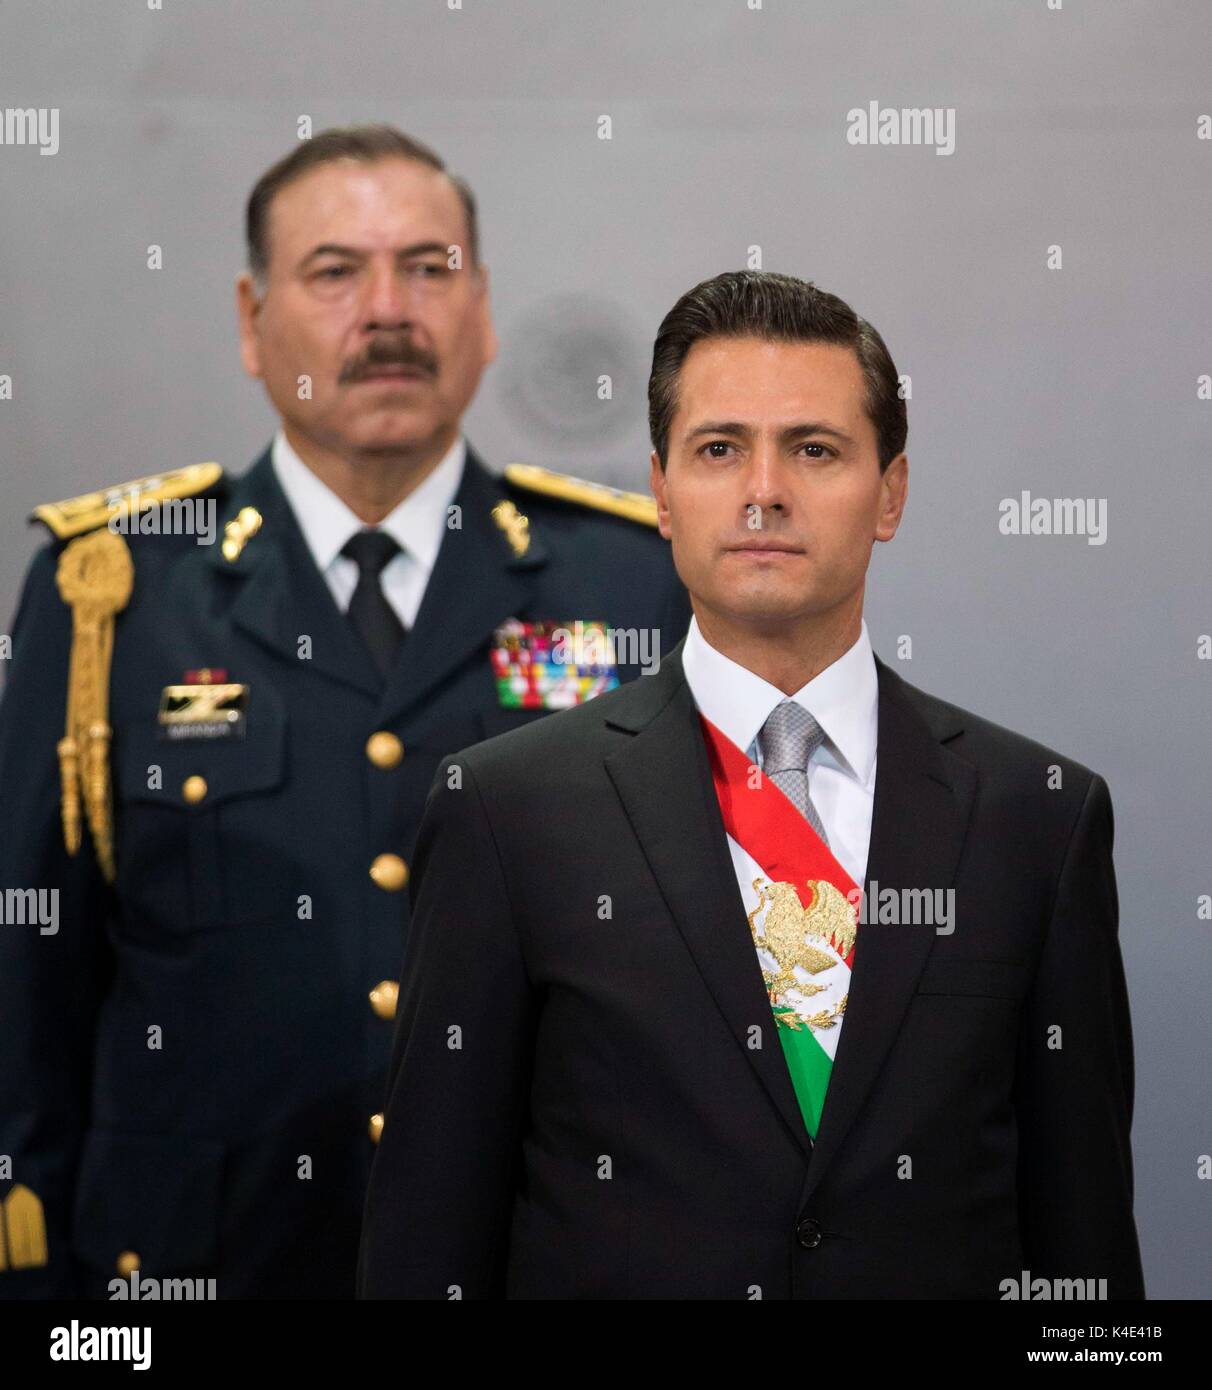 Mexican President Enrique Pena Nieto delivers his state of the union address at the National Palace September 2, 2017 in Mexico City, Mexico. Peña Nieto said he will not accept any proposal that goes against national dignity in its negotiations with the United States. Stock Photo